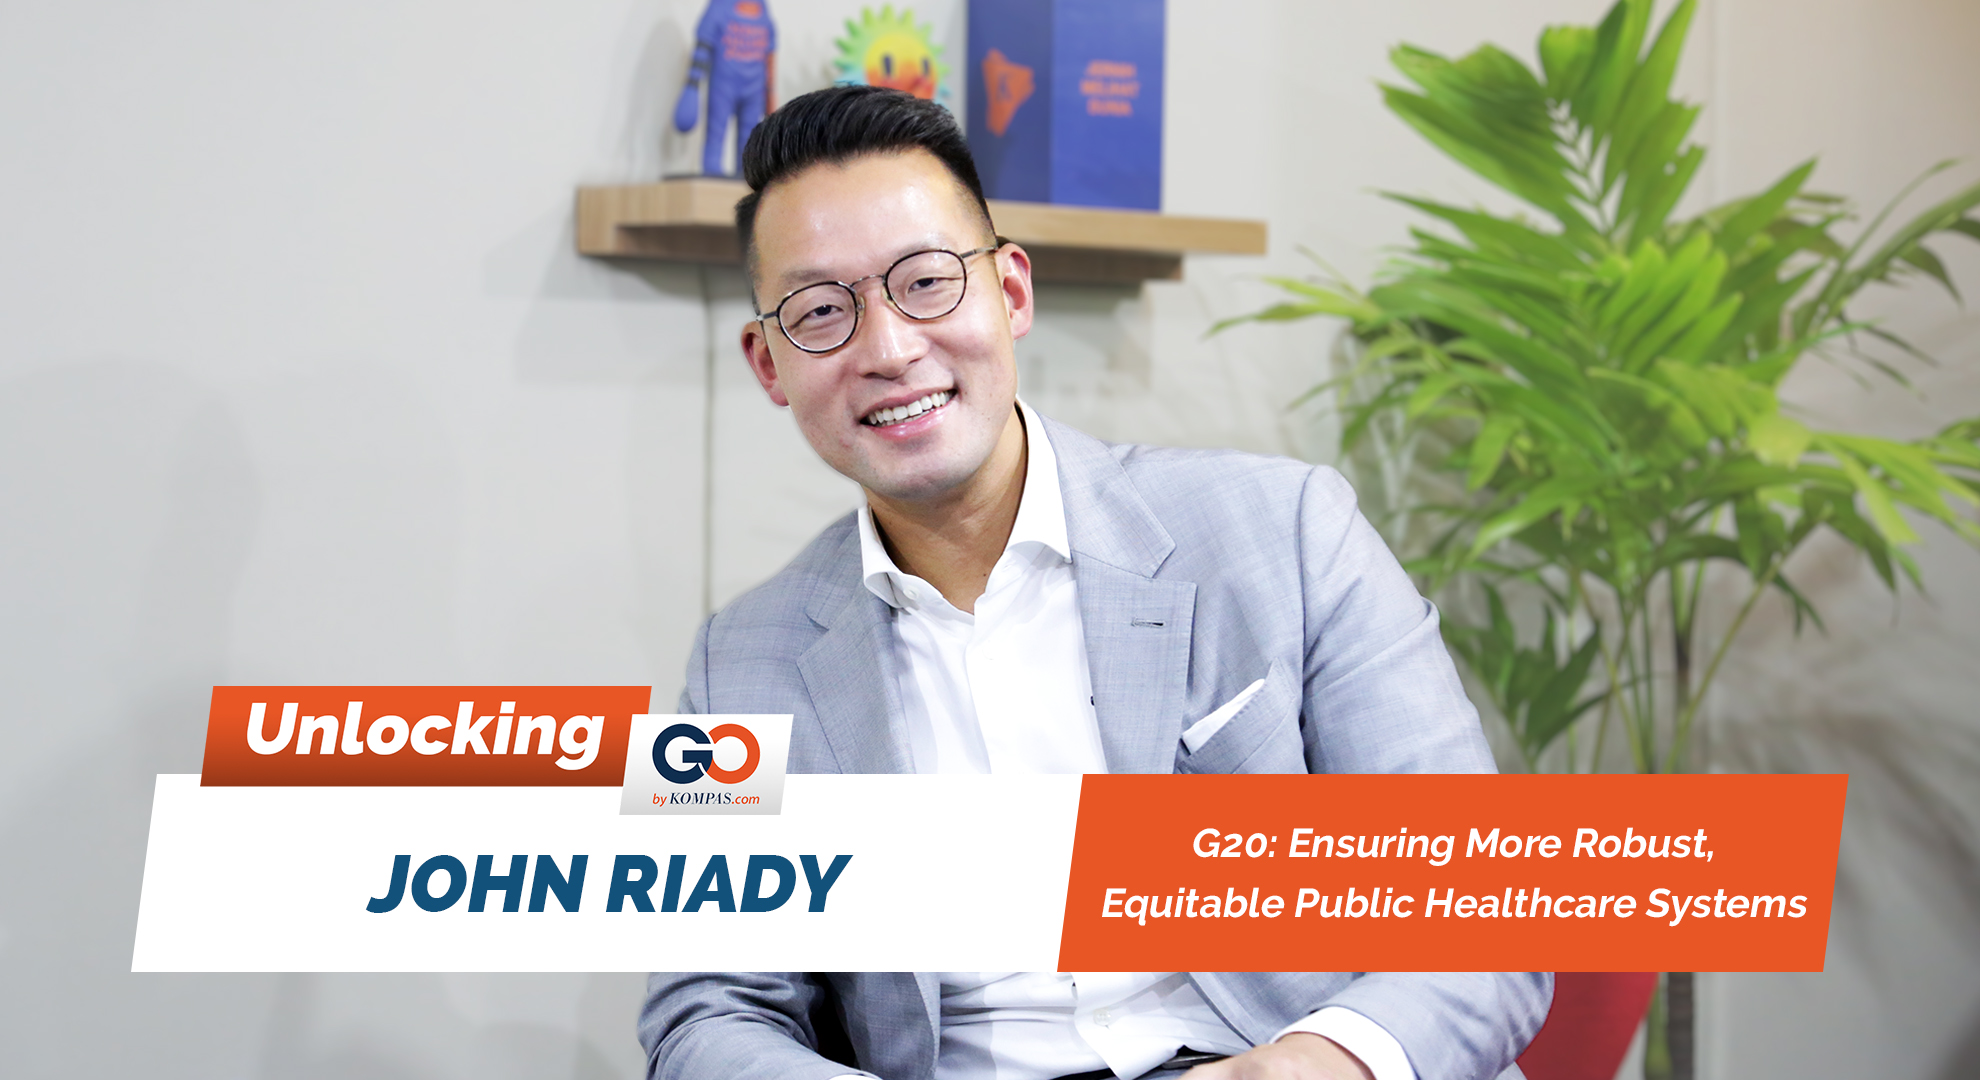 Unlocking Podcast 07  John Riady: G20: Ensuring More Robust, Equitable Public Healthcare Systems